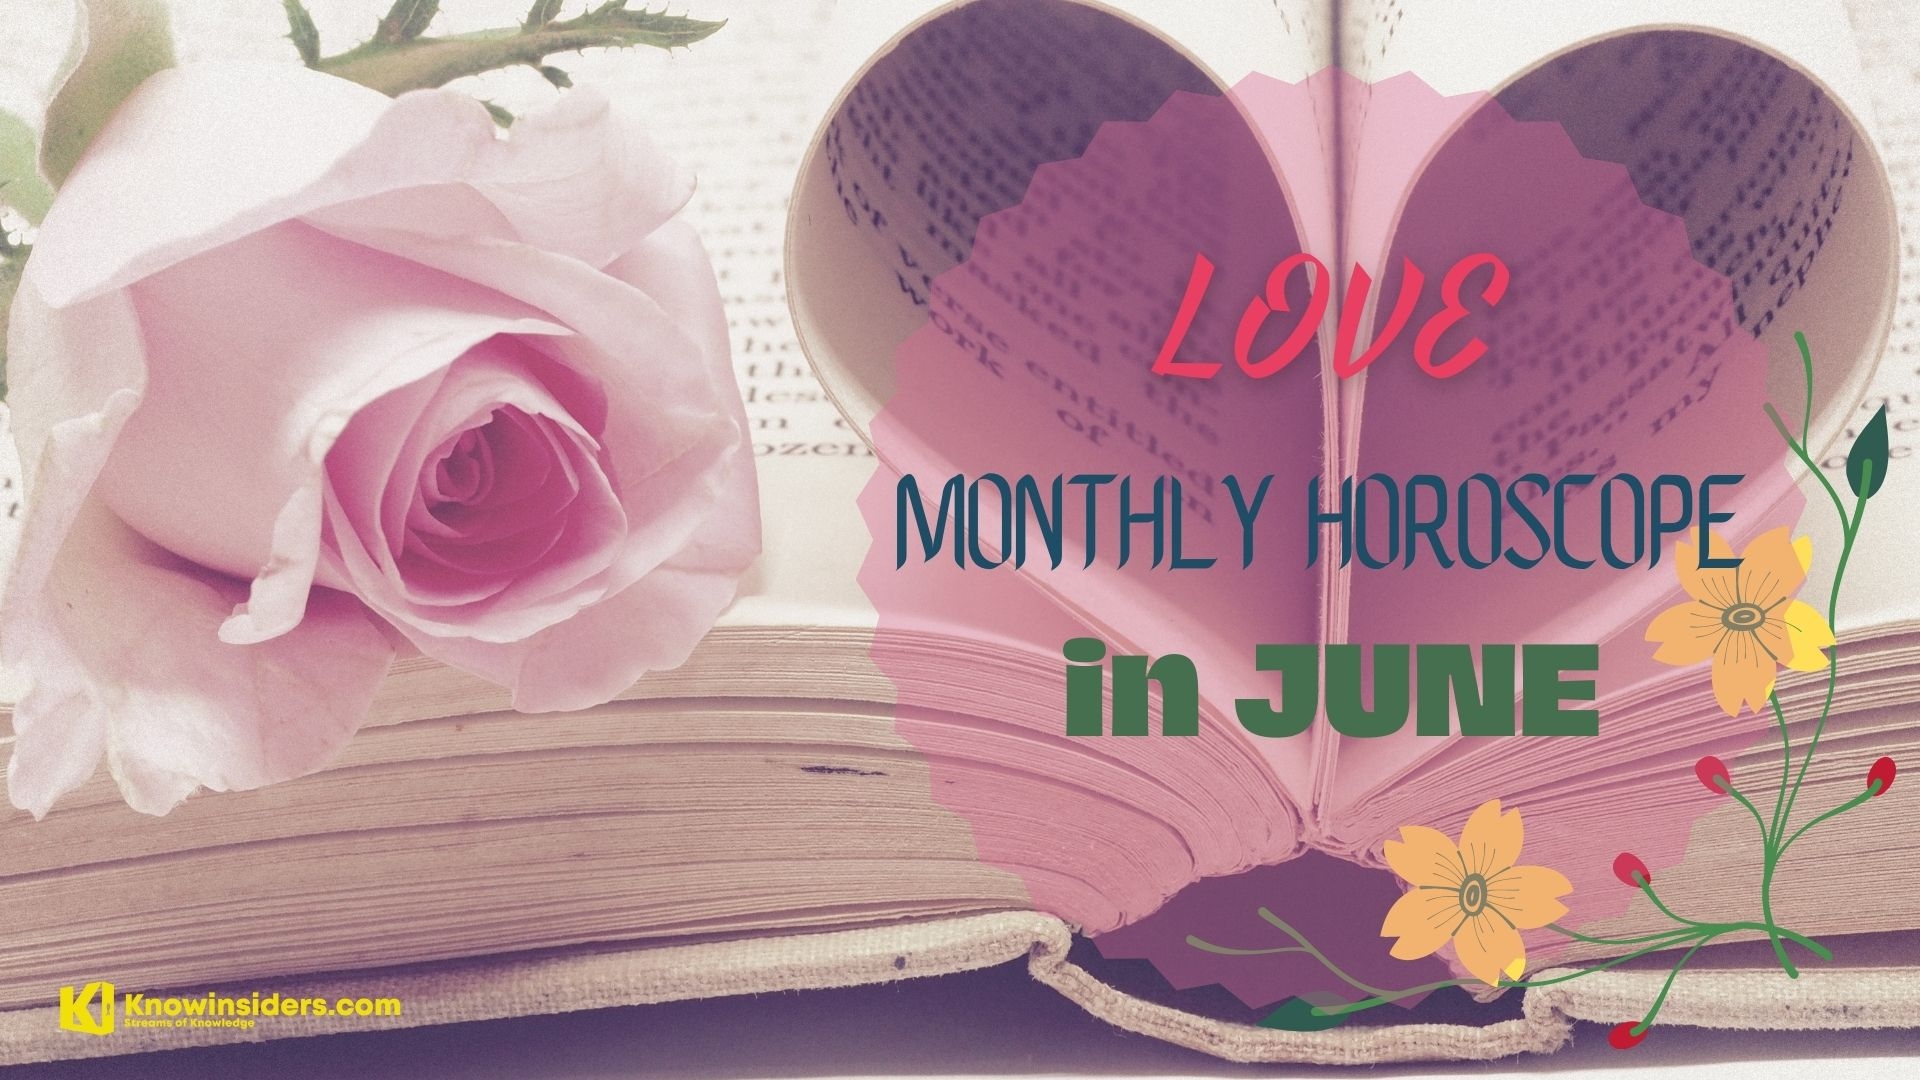 Love Monthly Horoscope June 2022: Best Prediction For 12 Zodiac Signs